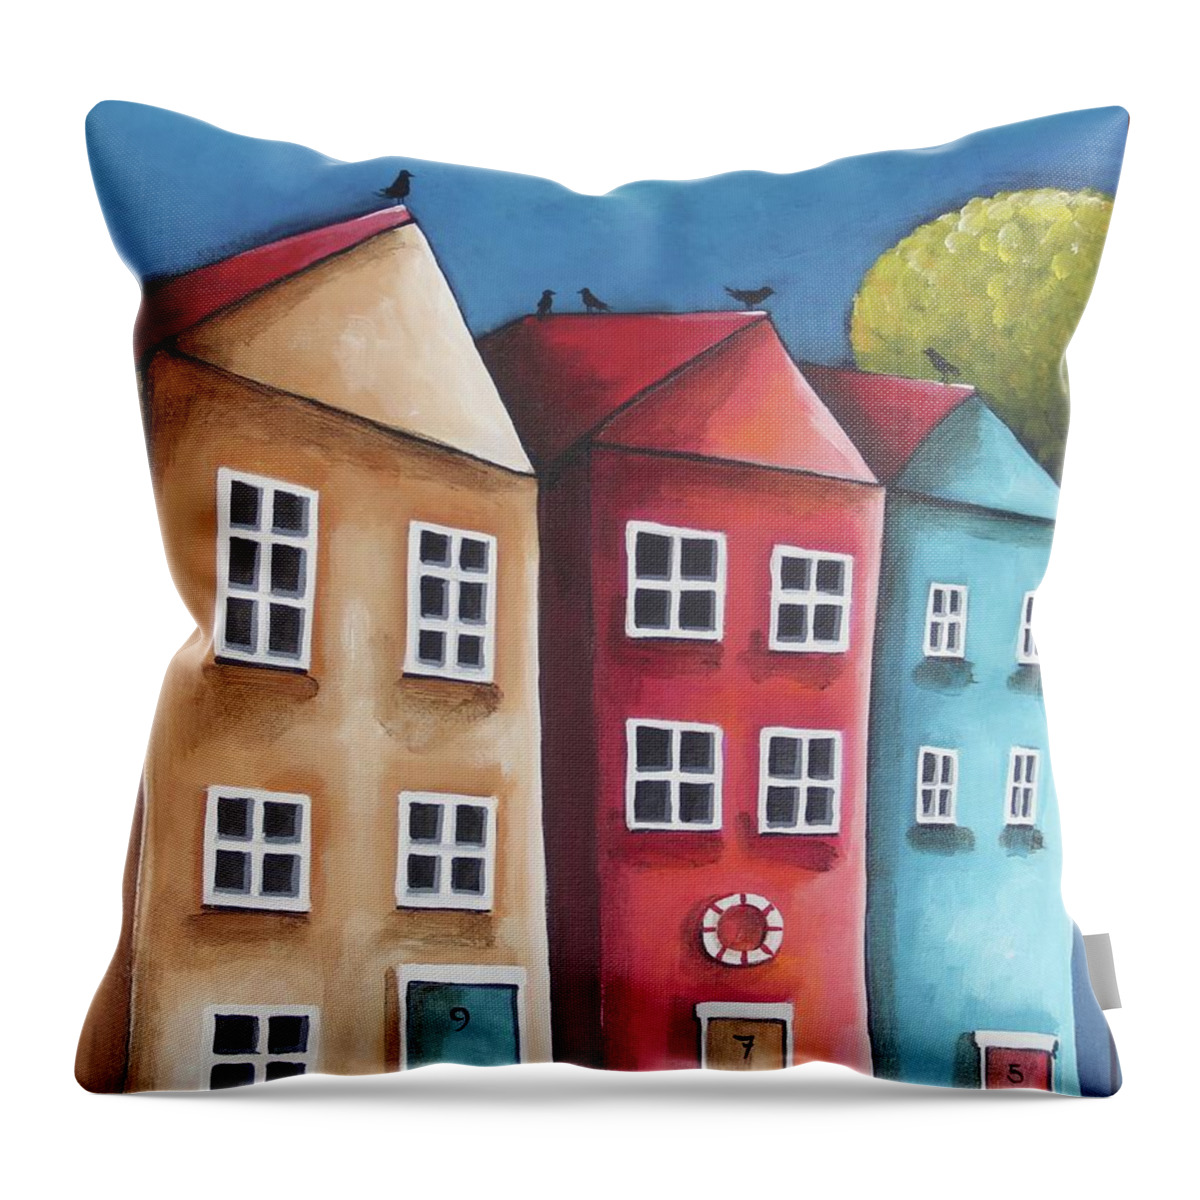 Whimsical Throw Pillow featuring the painting The Three Sisters by Lucia Stewart